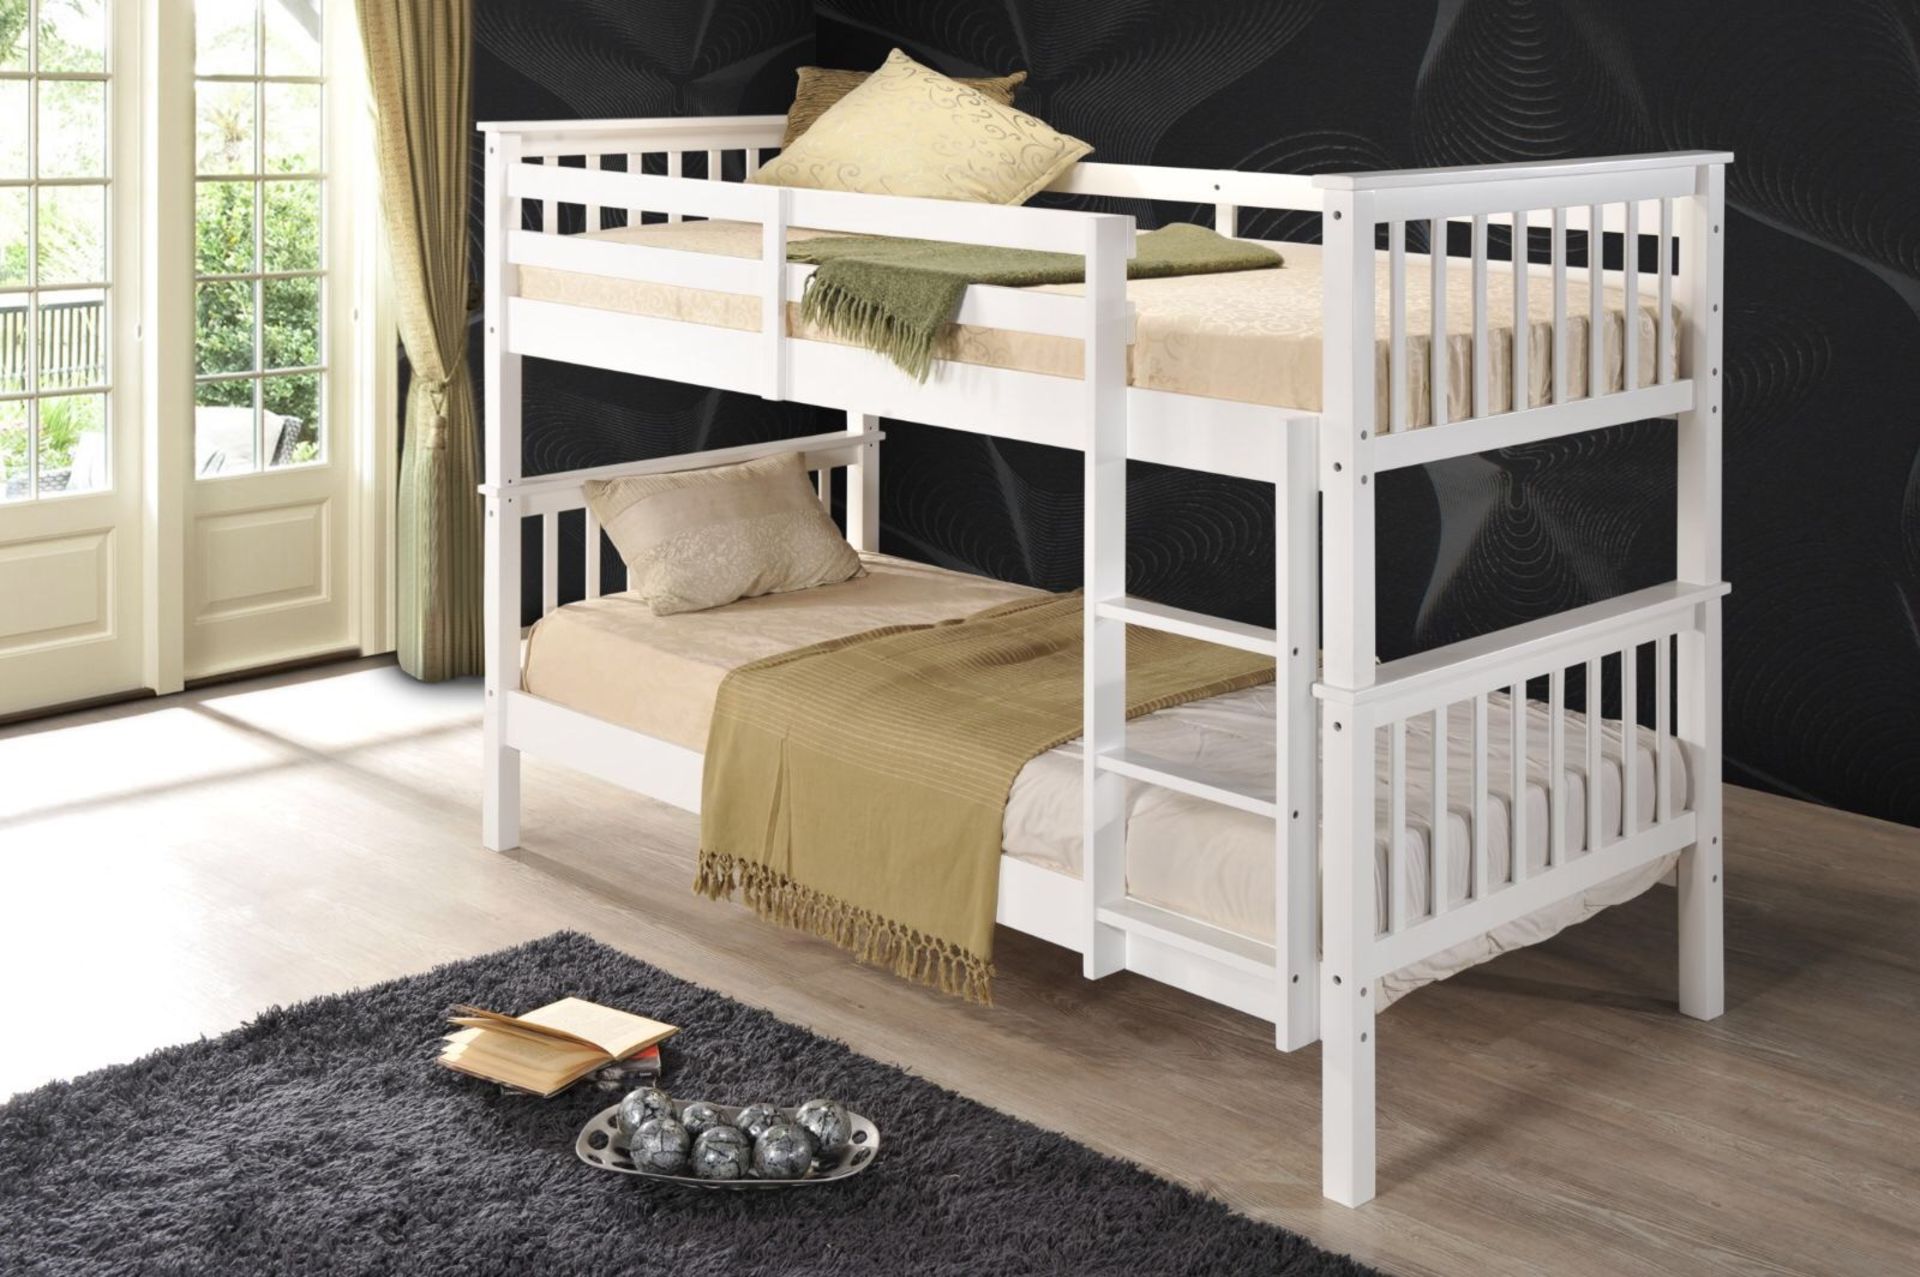 1 BRAND NEW BOXED WHITE SOLID WOOD BUNK BED